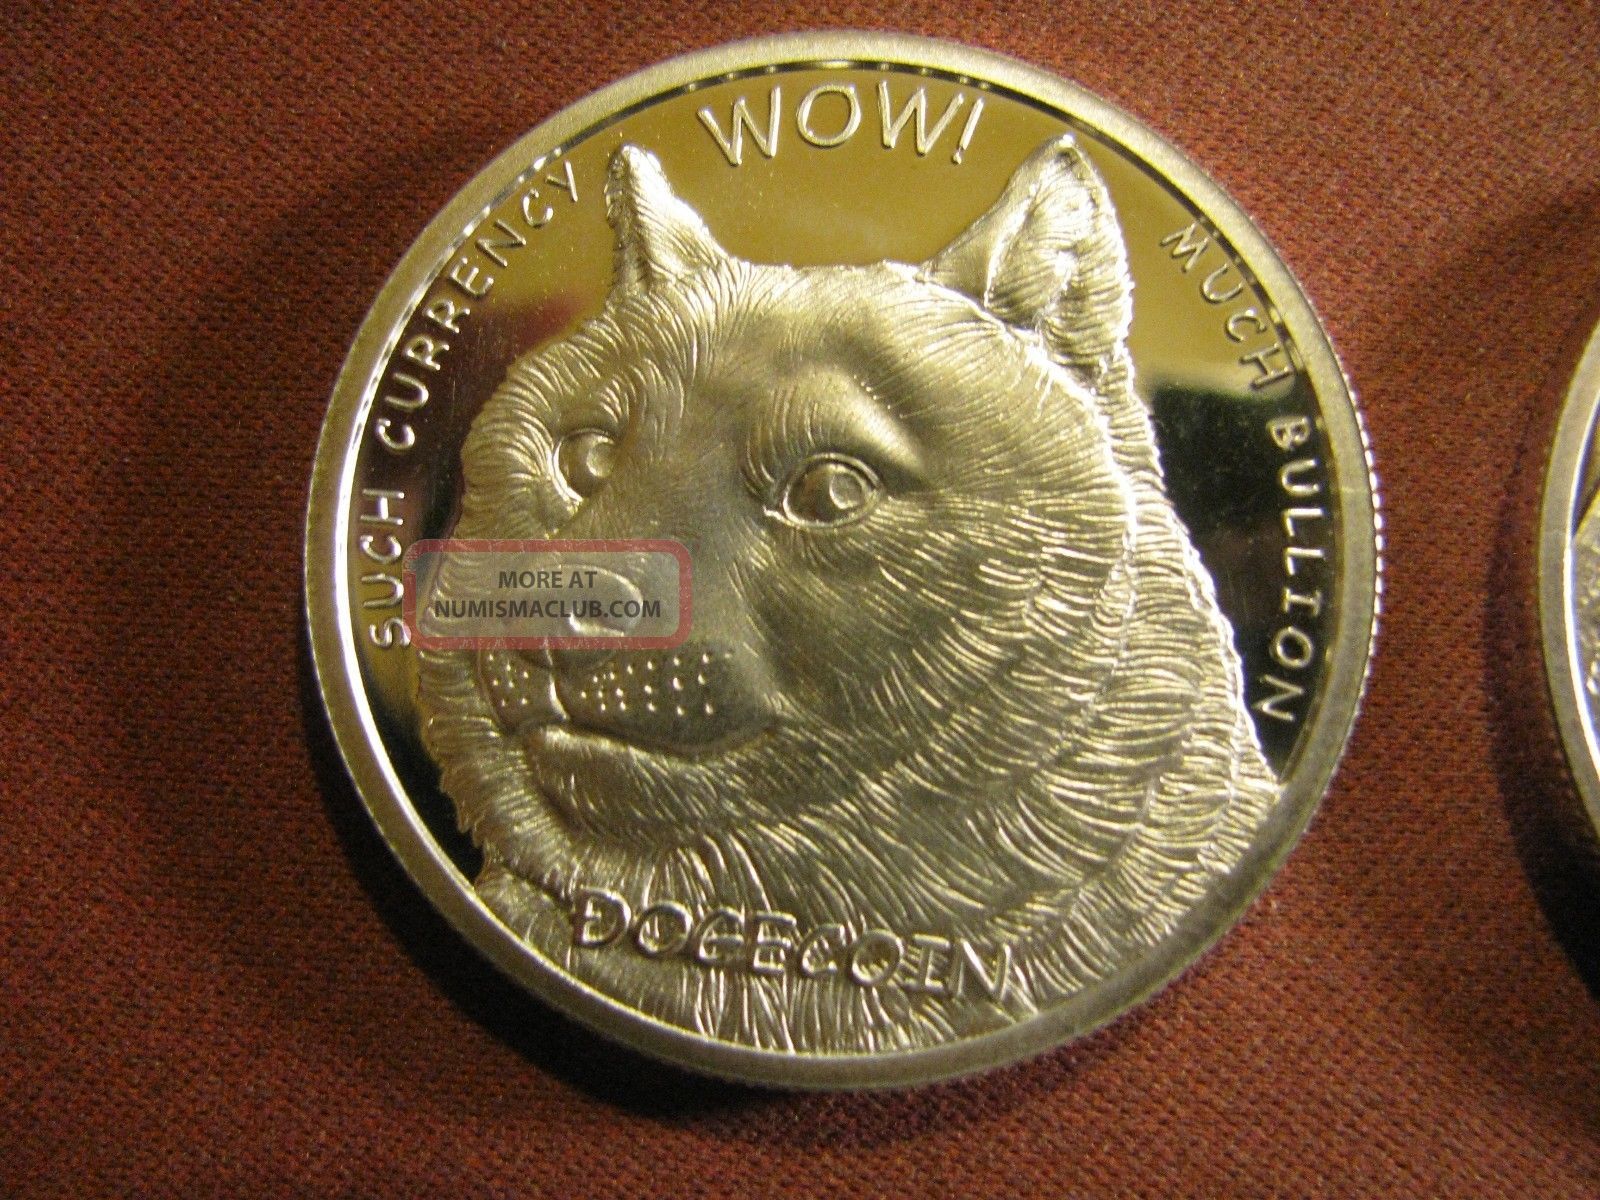 Doge Coin Usd : Dogecoin to 1 dollar? Reddit turns to DOGE ...